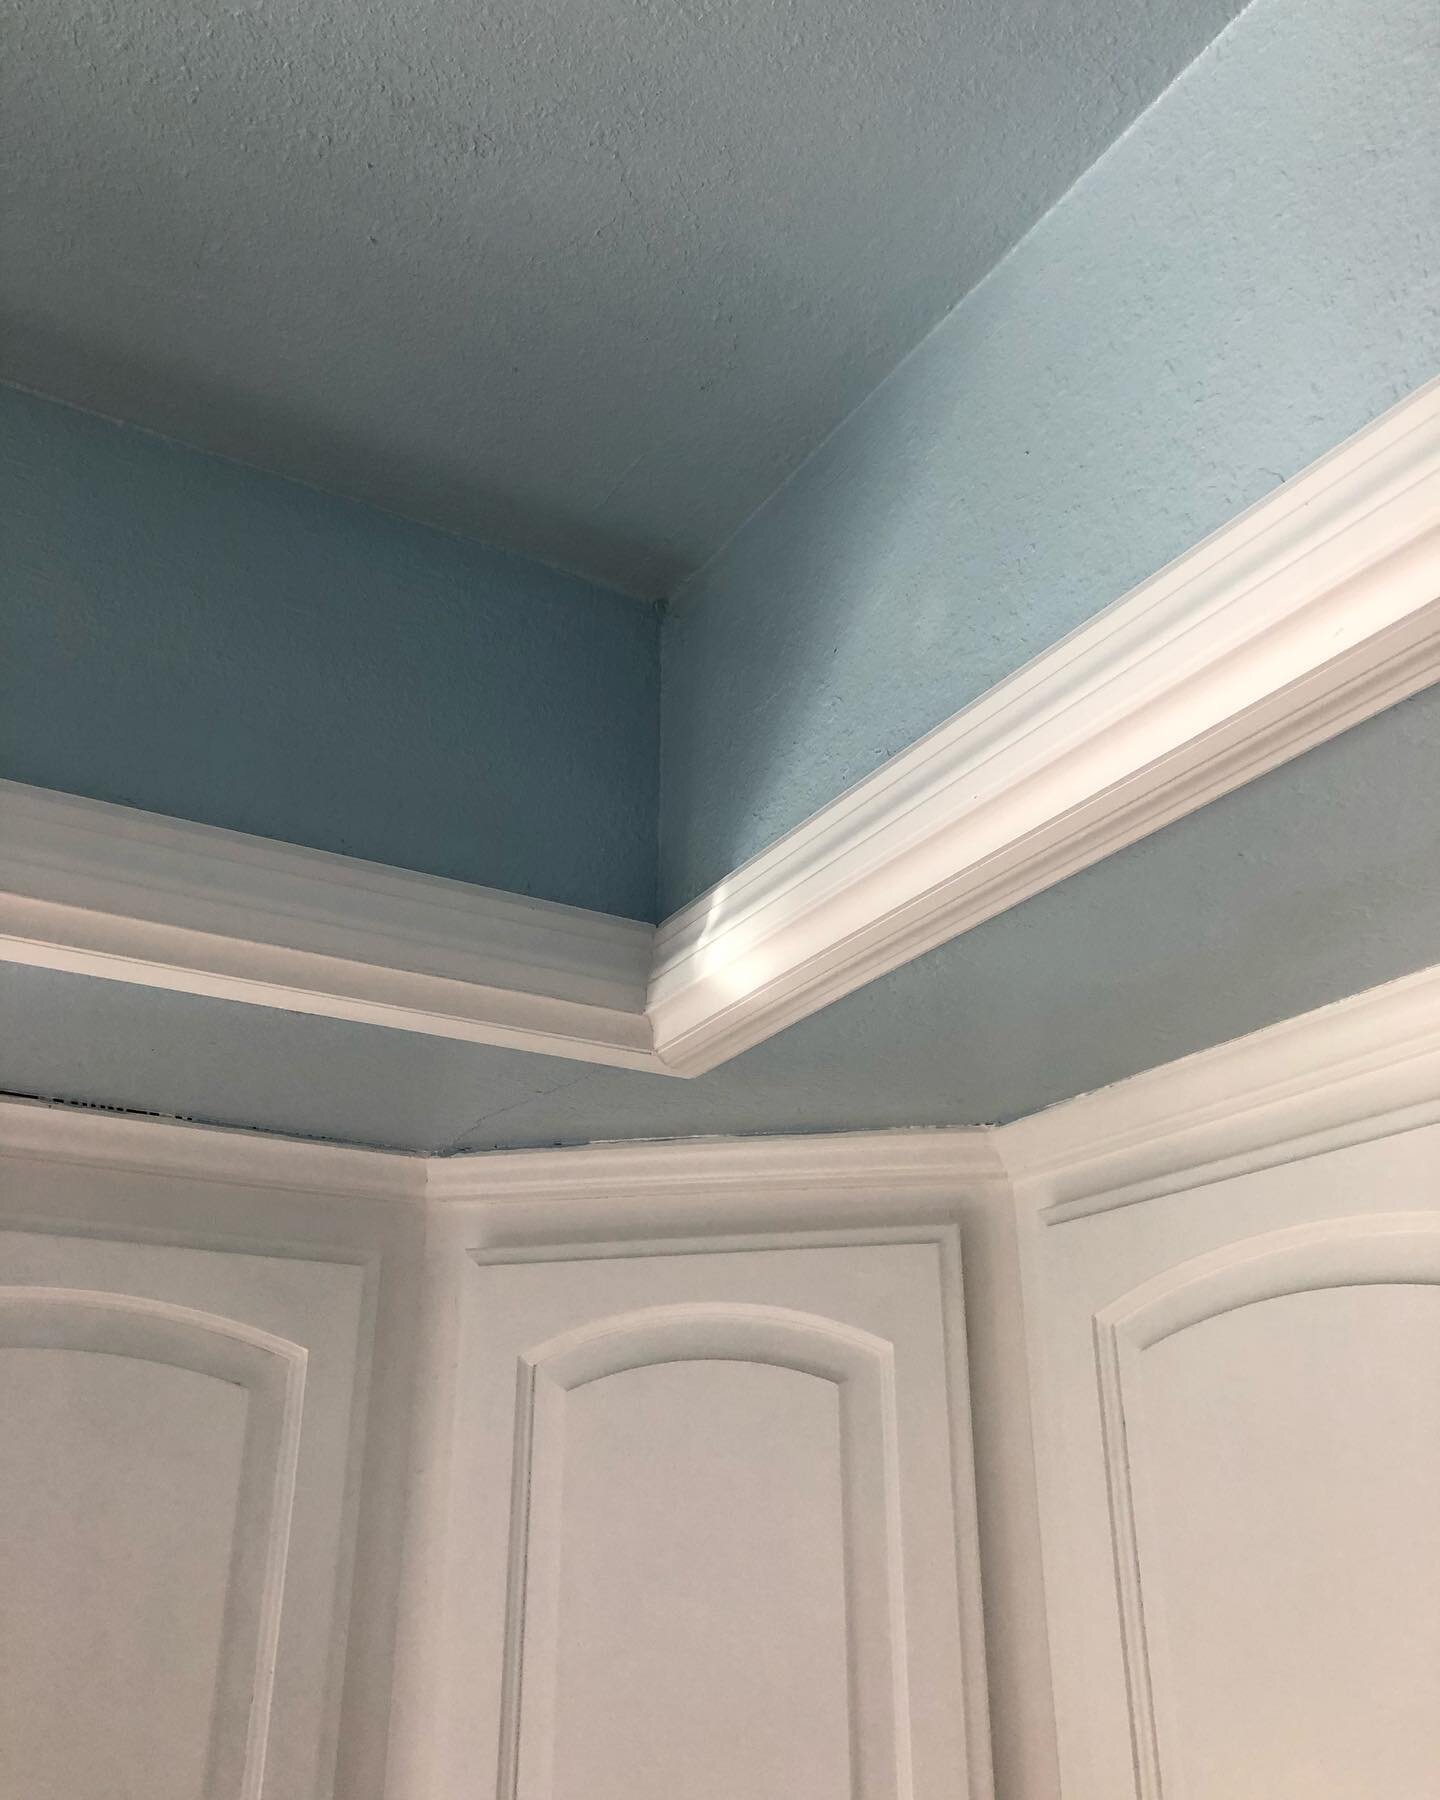 Addition of outside corner molding into the soffit and brand new hardware gives this kitchen and client a fresh updated look #remodel #renovation #repair #homeremodel #homerenovation #homerepair #kitchendesign #kitchenremodel #hardware #molding #trim